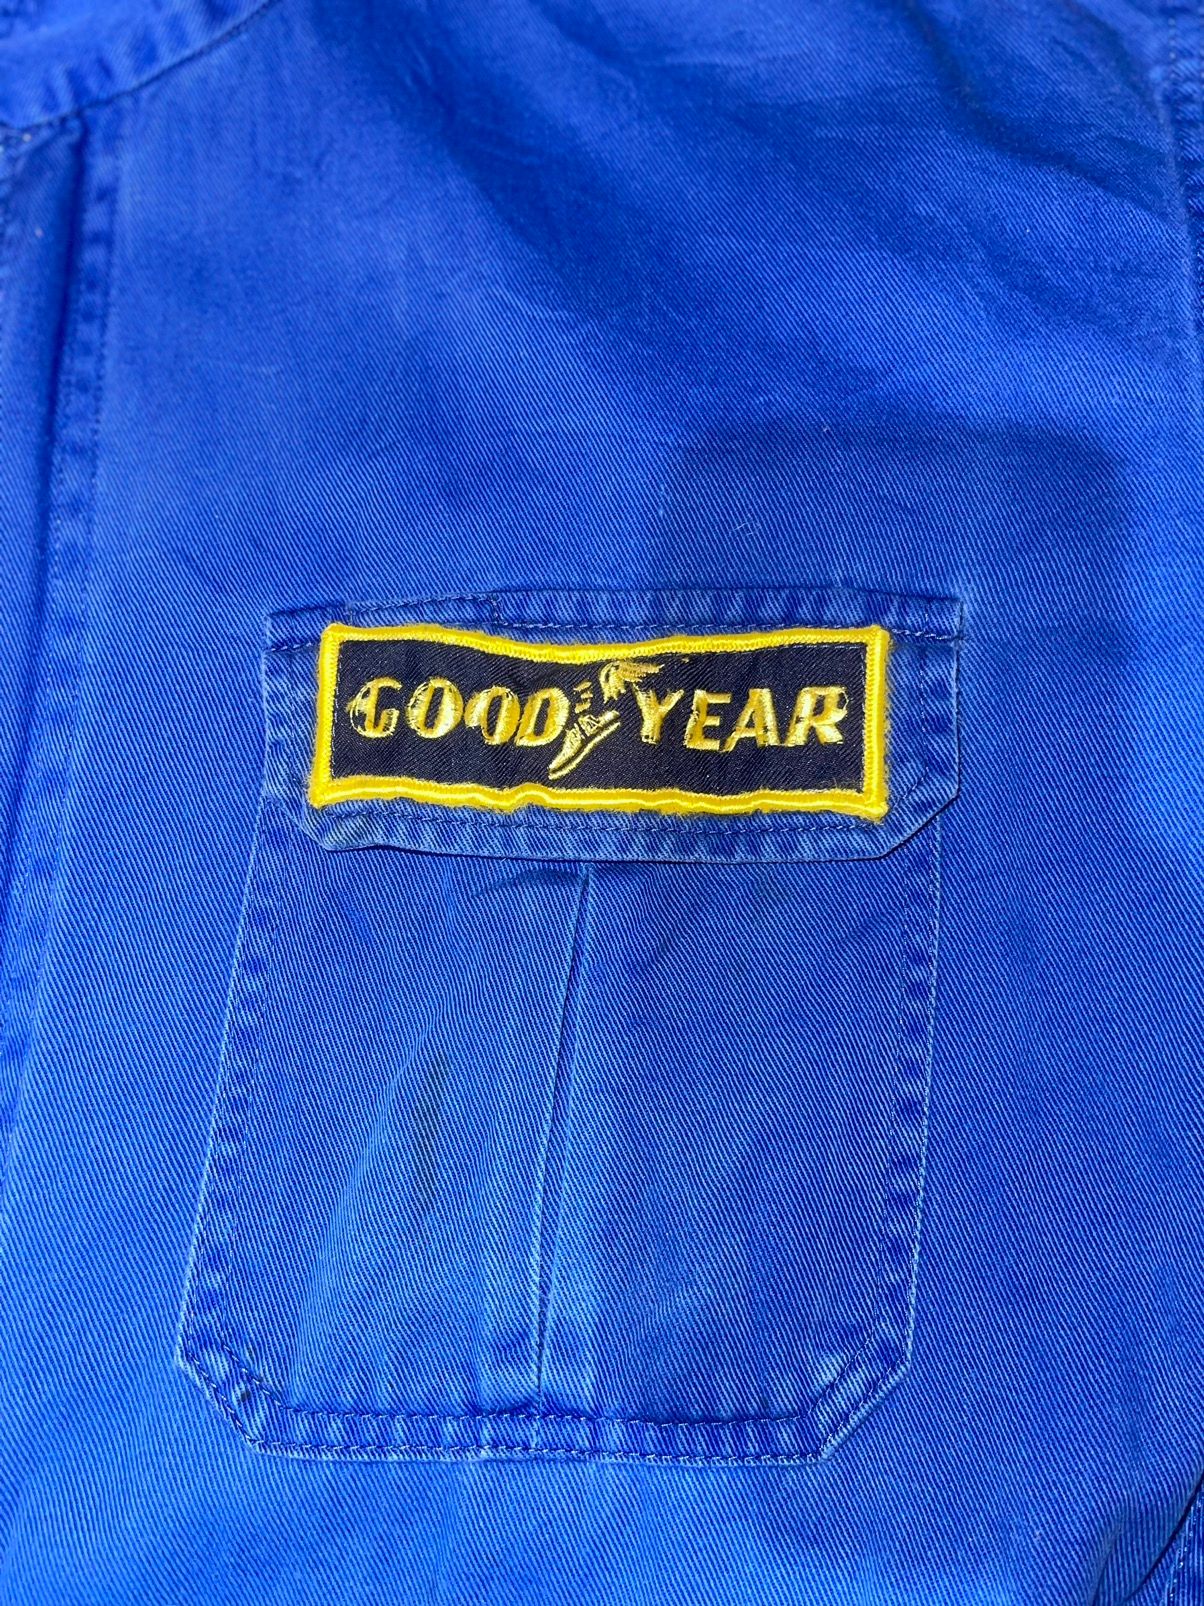 VINTAGE GOOD YEAR RACING OVERALL JUMPSUIT - 5